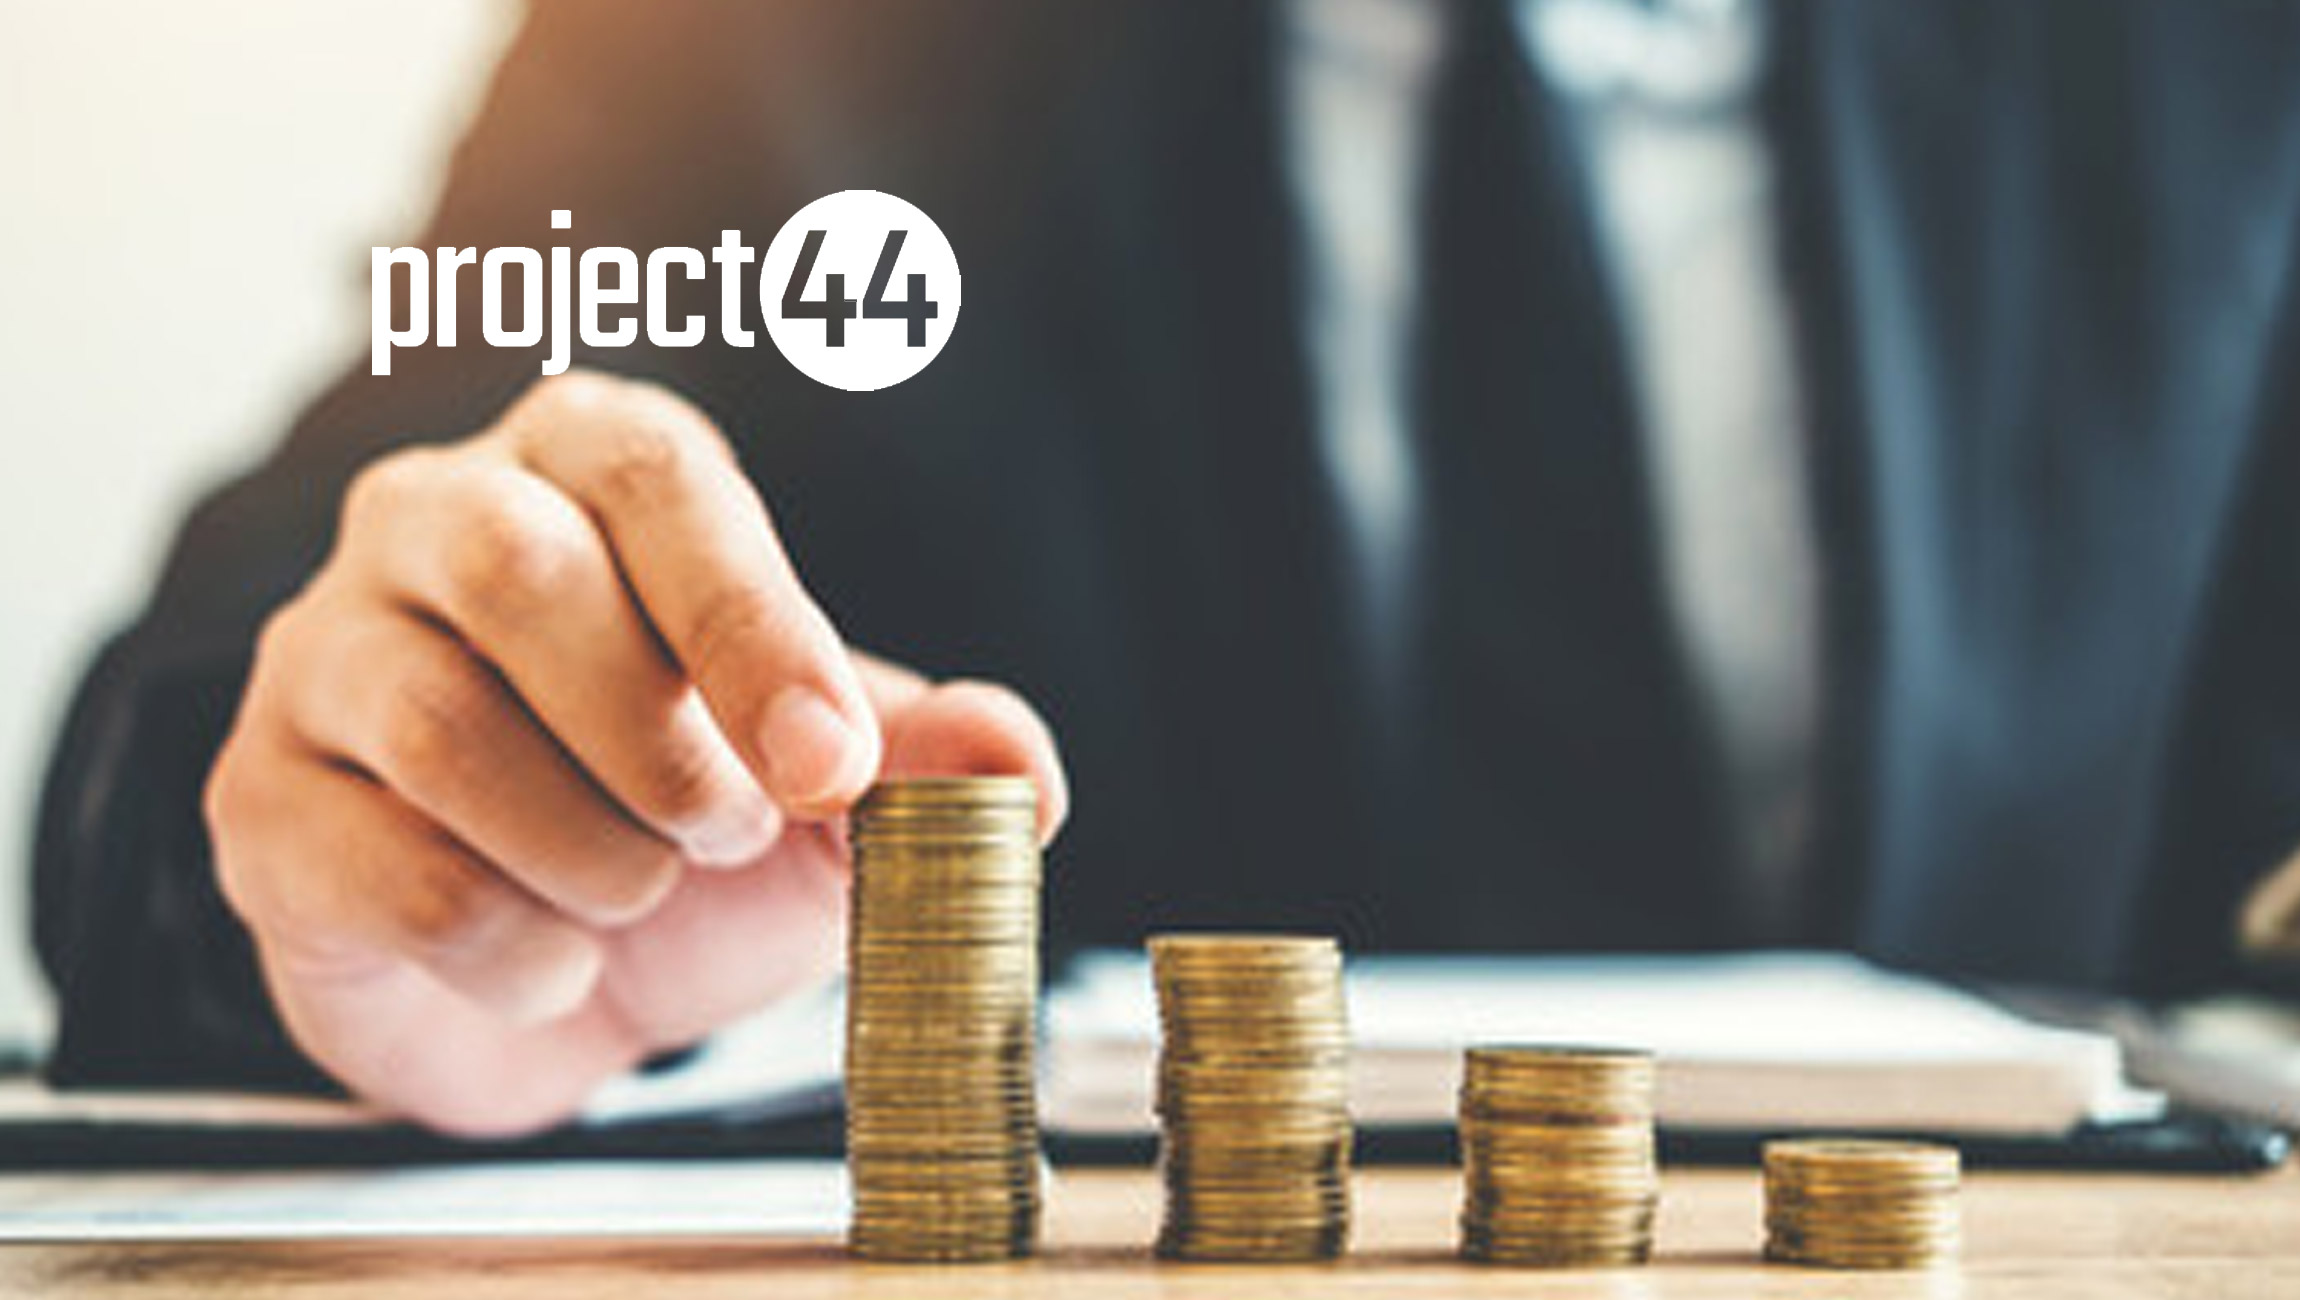 project44 Concludes Blockbuster FY 2023 With 51% YoY Growth in Total GAAP Revenue and $2.7 Billion Valuation  